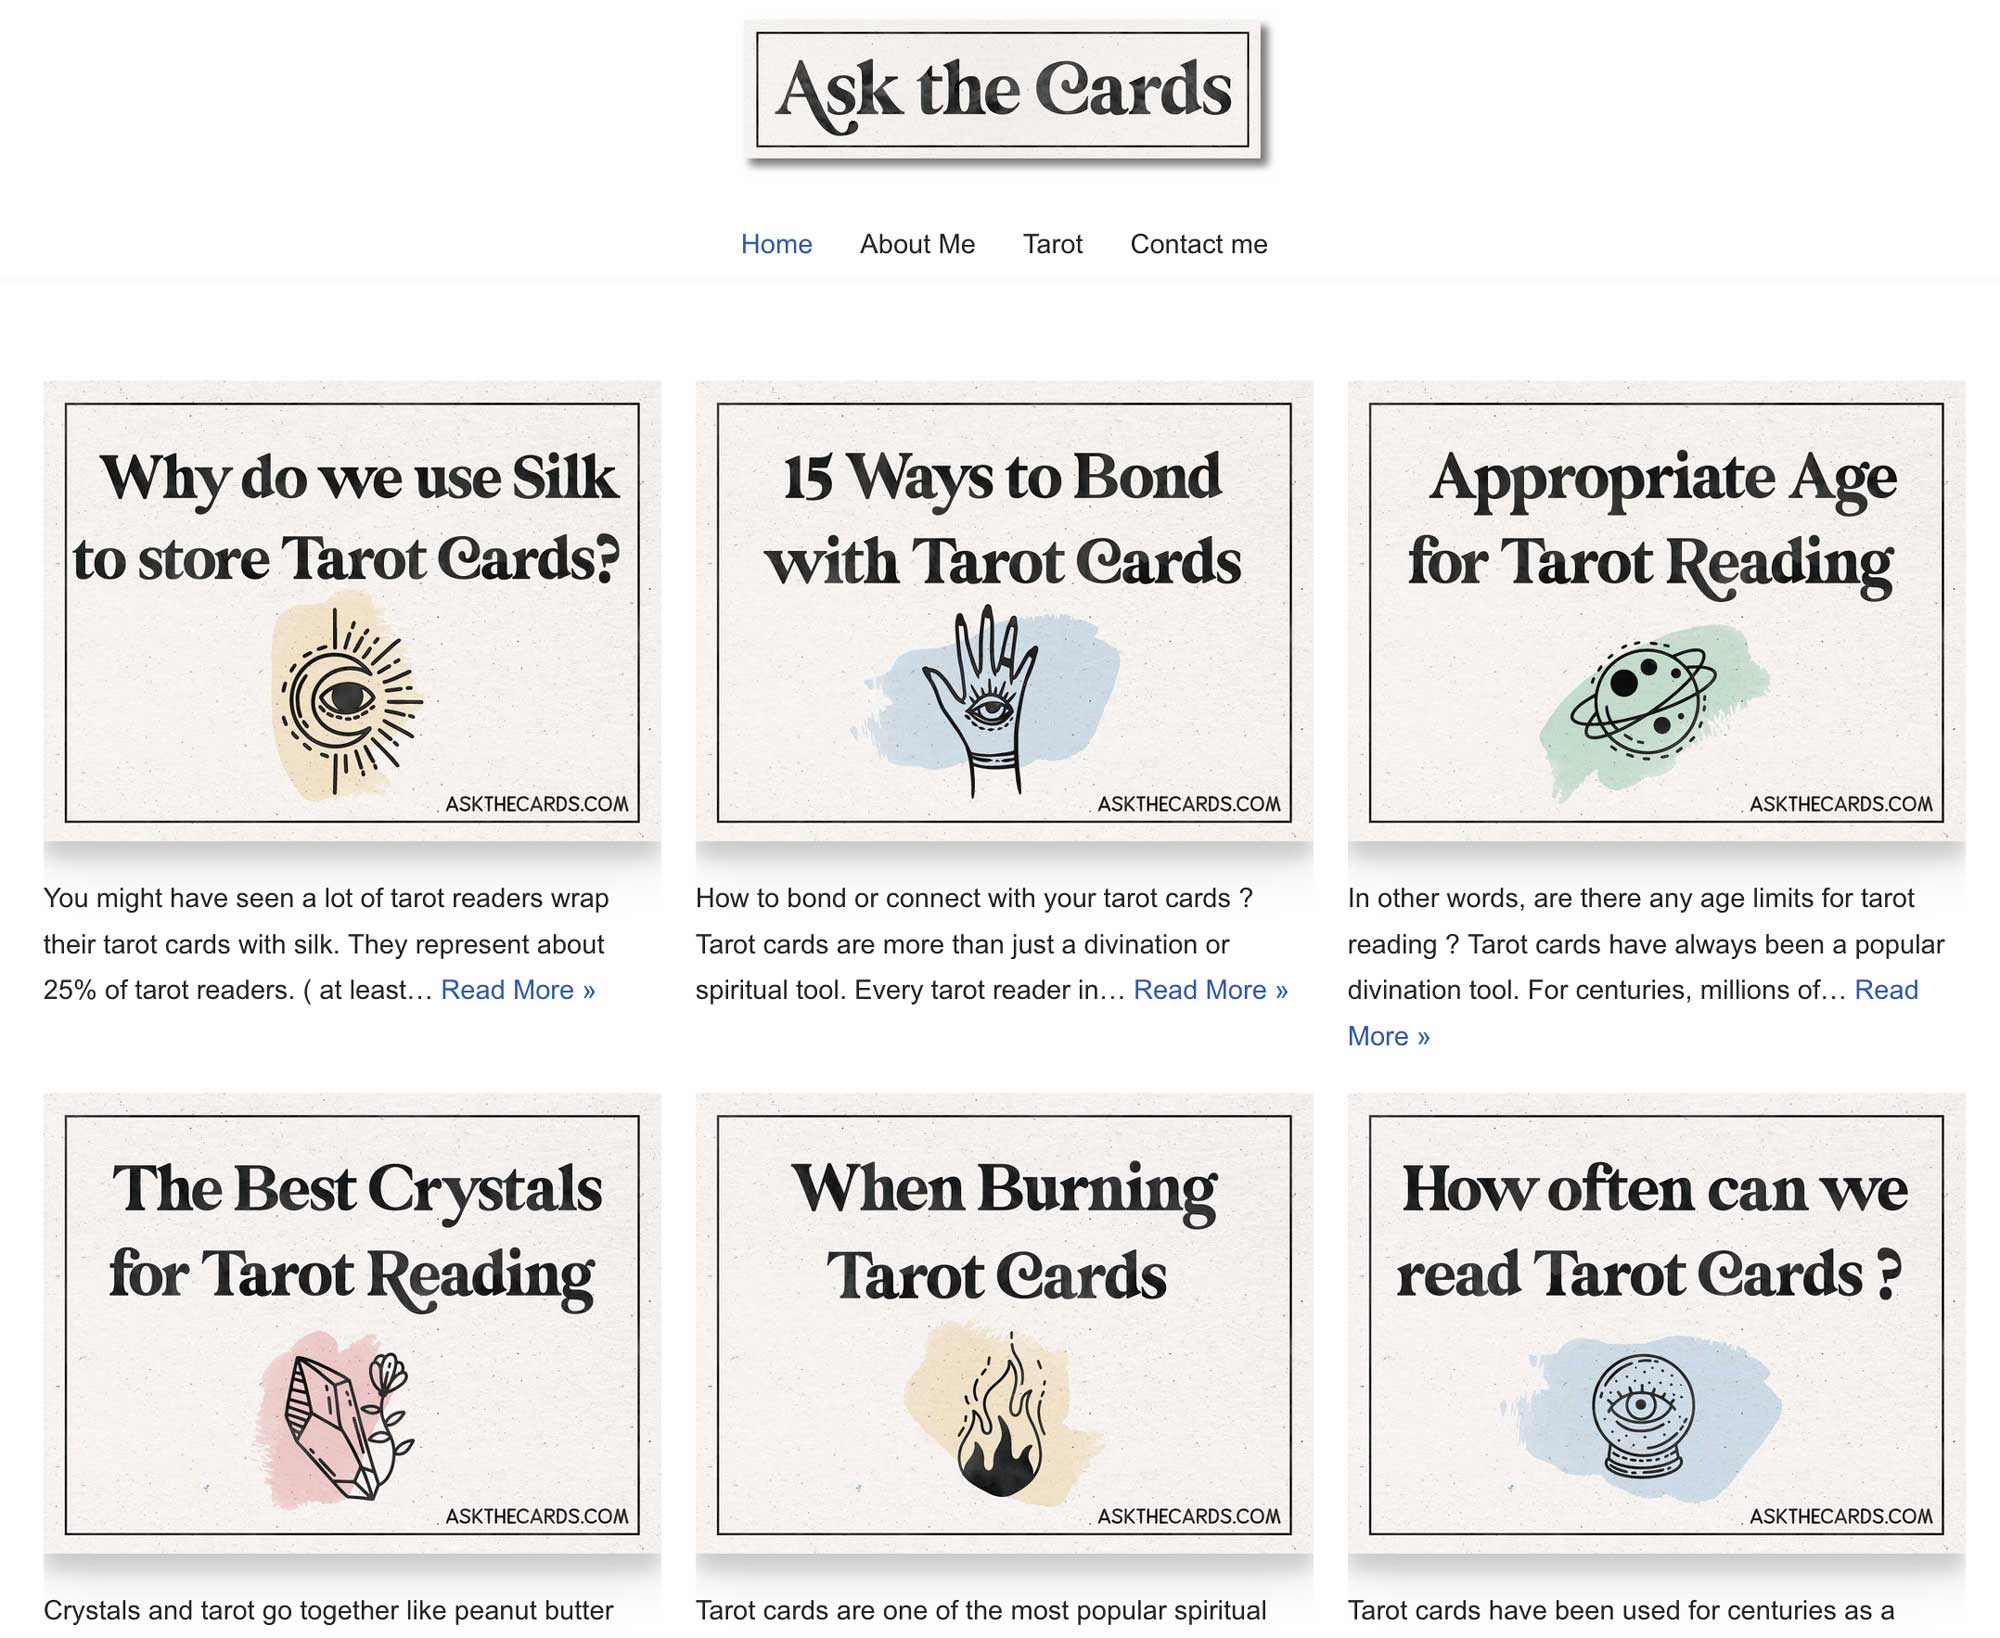 ask the cards website